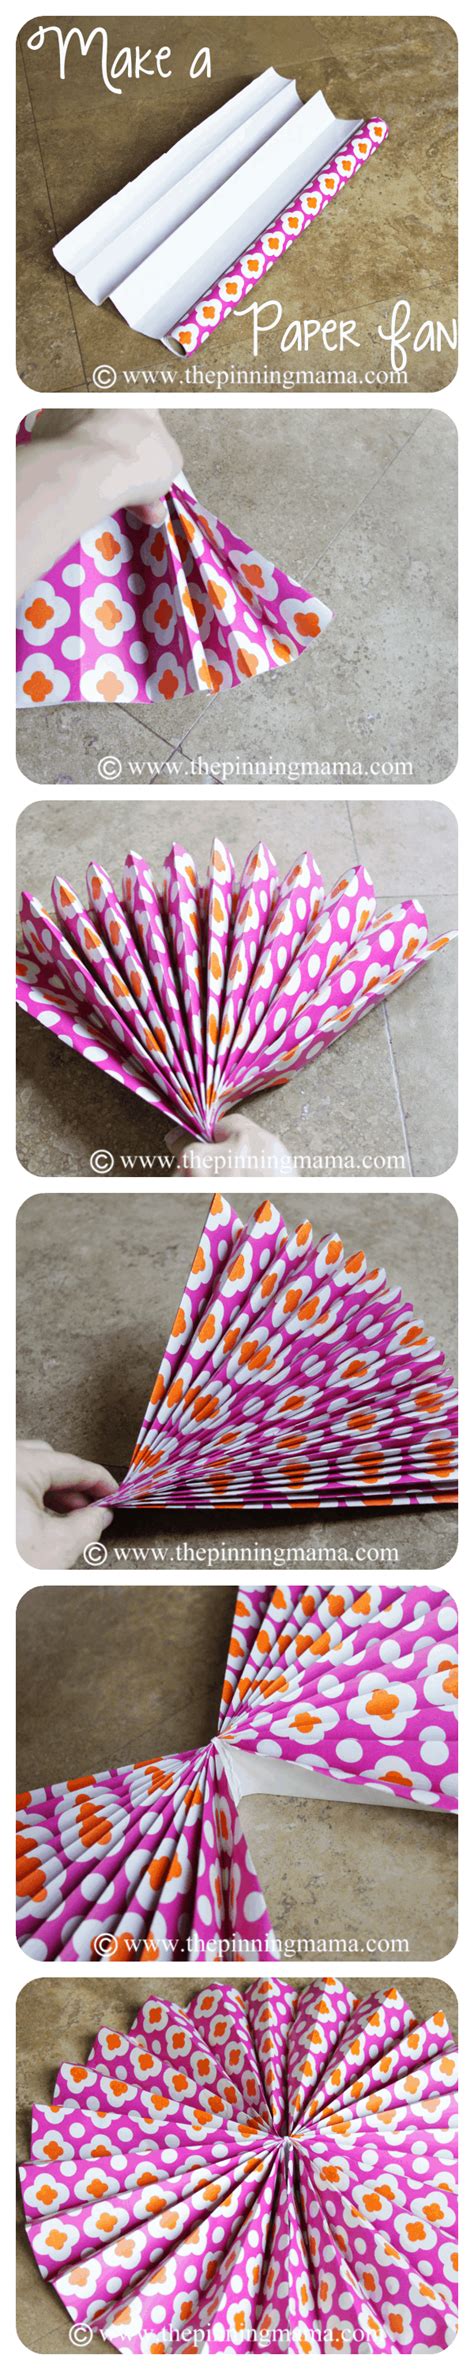 Diy Party Decor How To Make A Paper Fan Backdrop The Pinning Mama